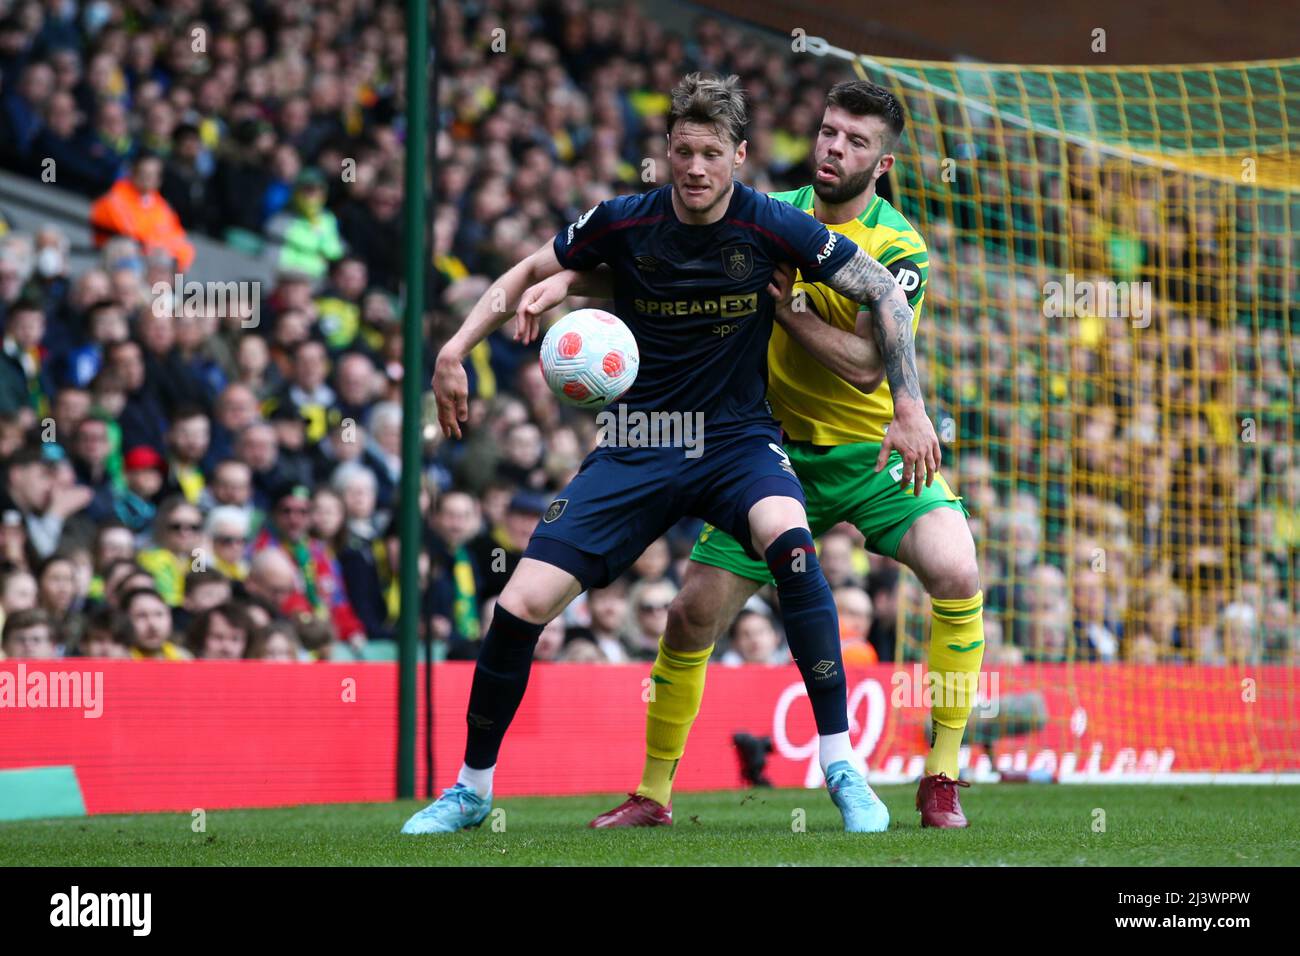 Wout Weghorst #9 of Burnley holds the ball up under pressure from Grant Hanley #5 of Norwich City Stock Photo